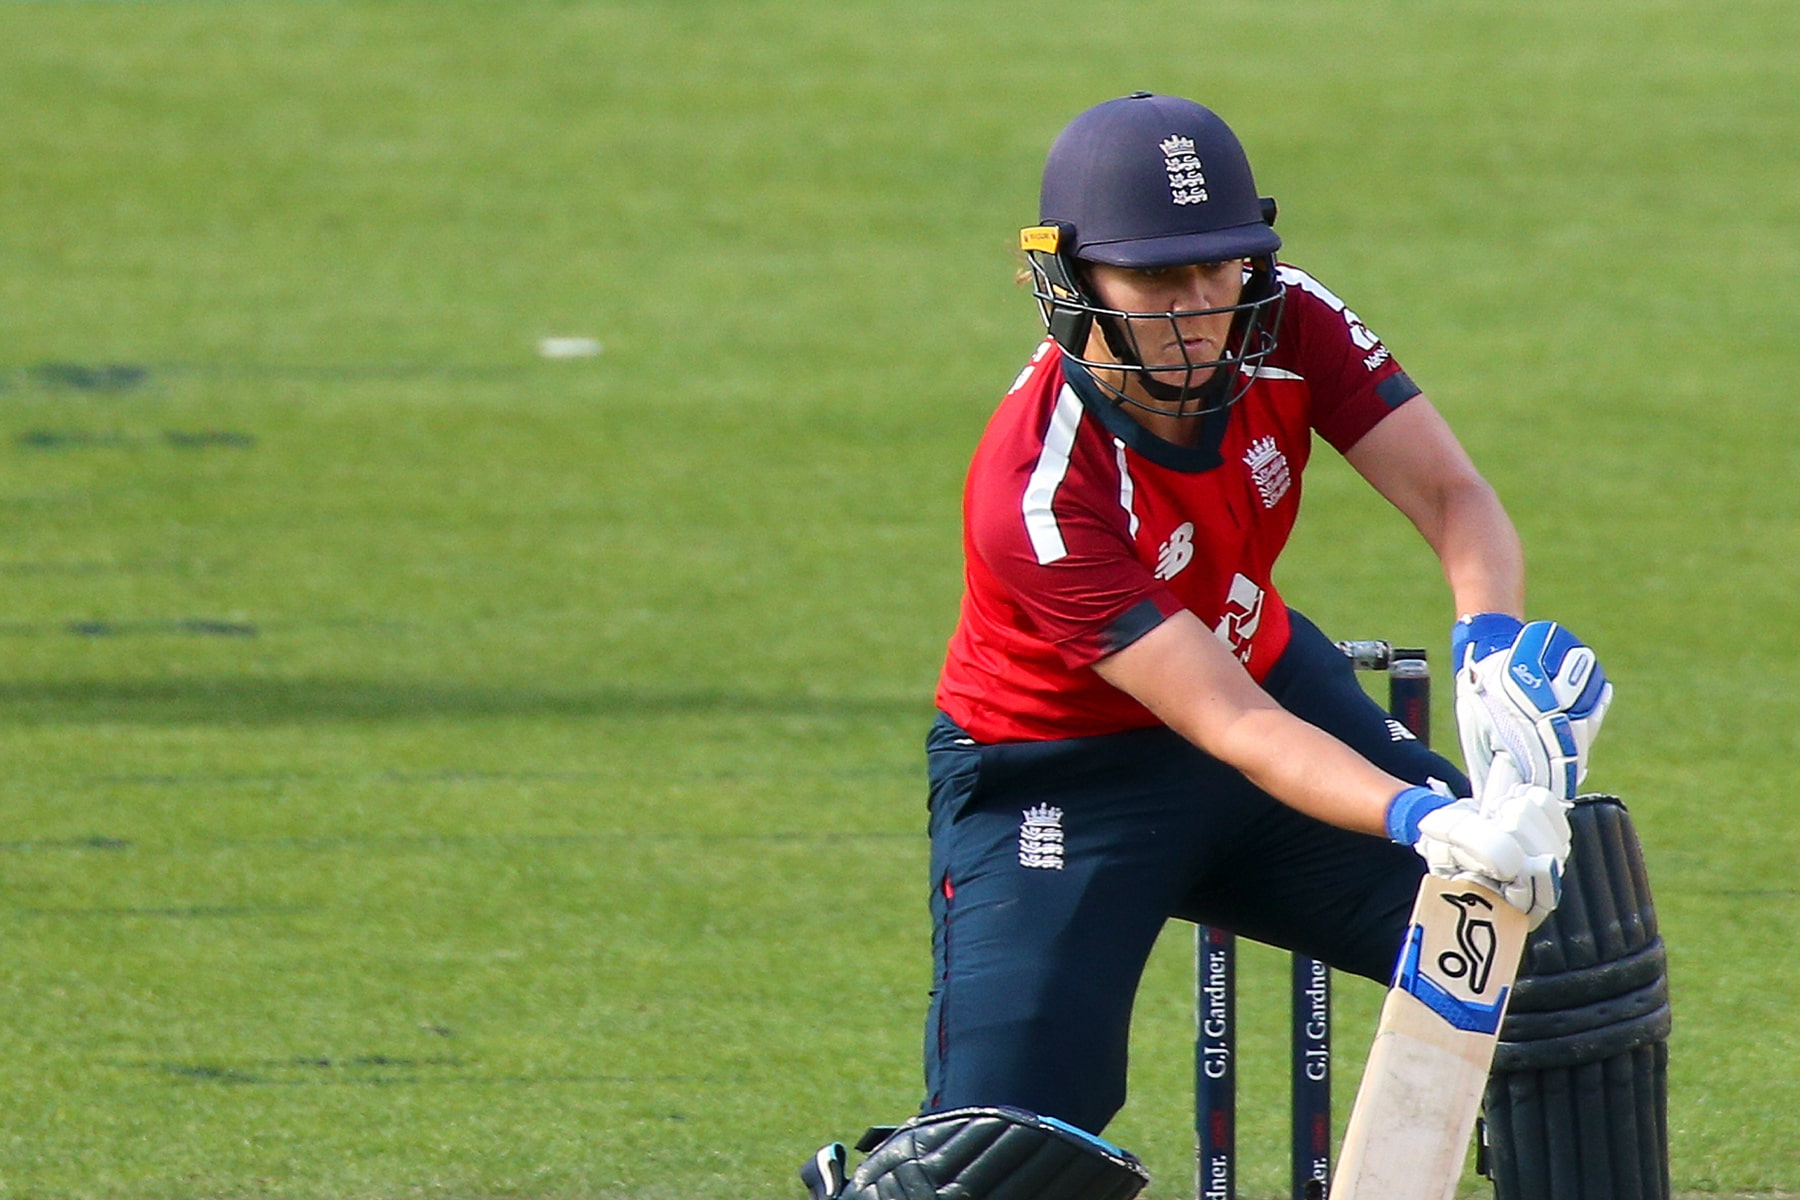 Sciver, Jones and Root are MVPs